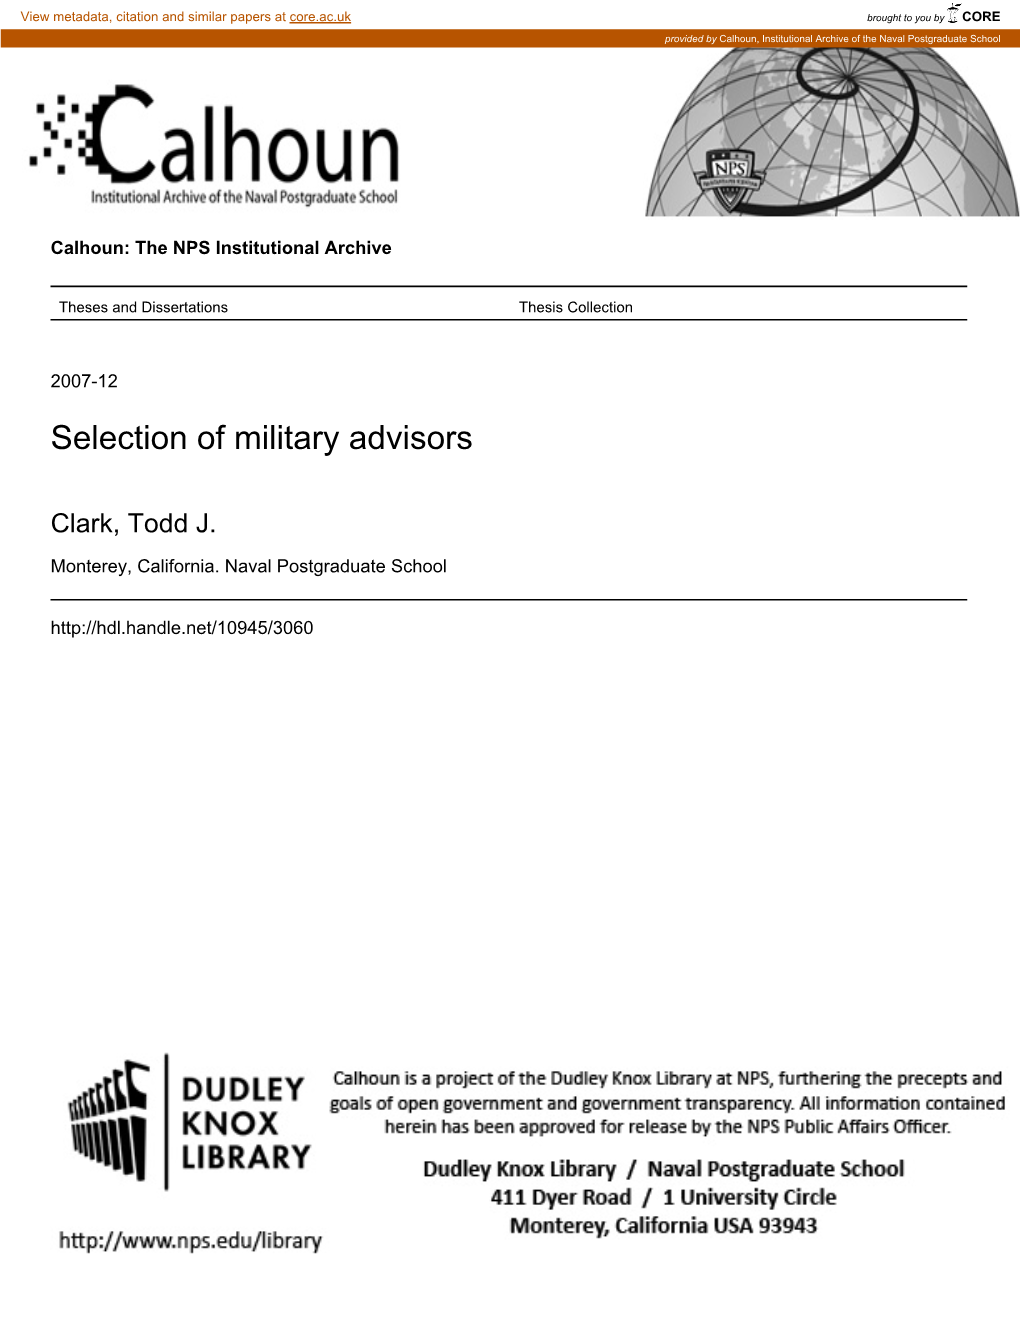 Selection of Military Advisors